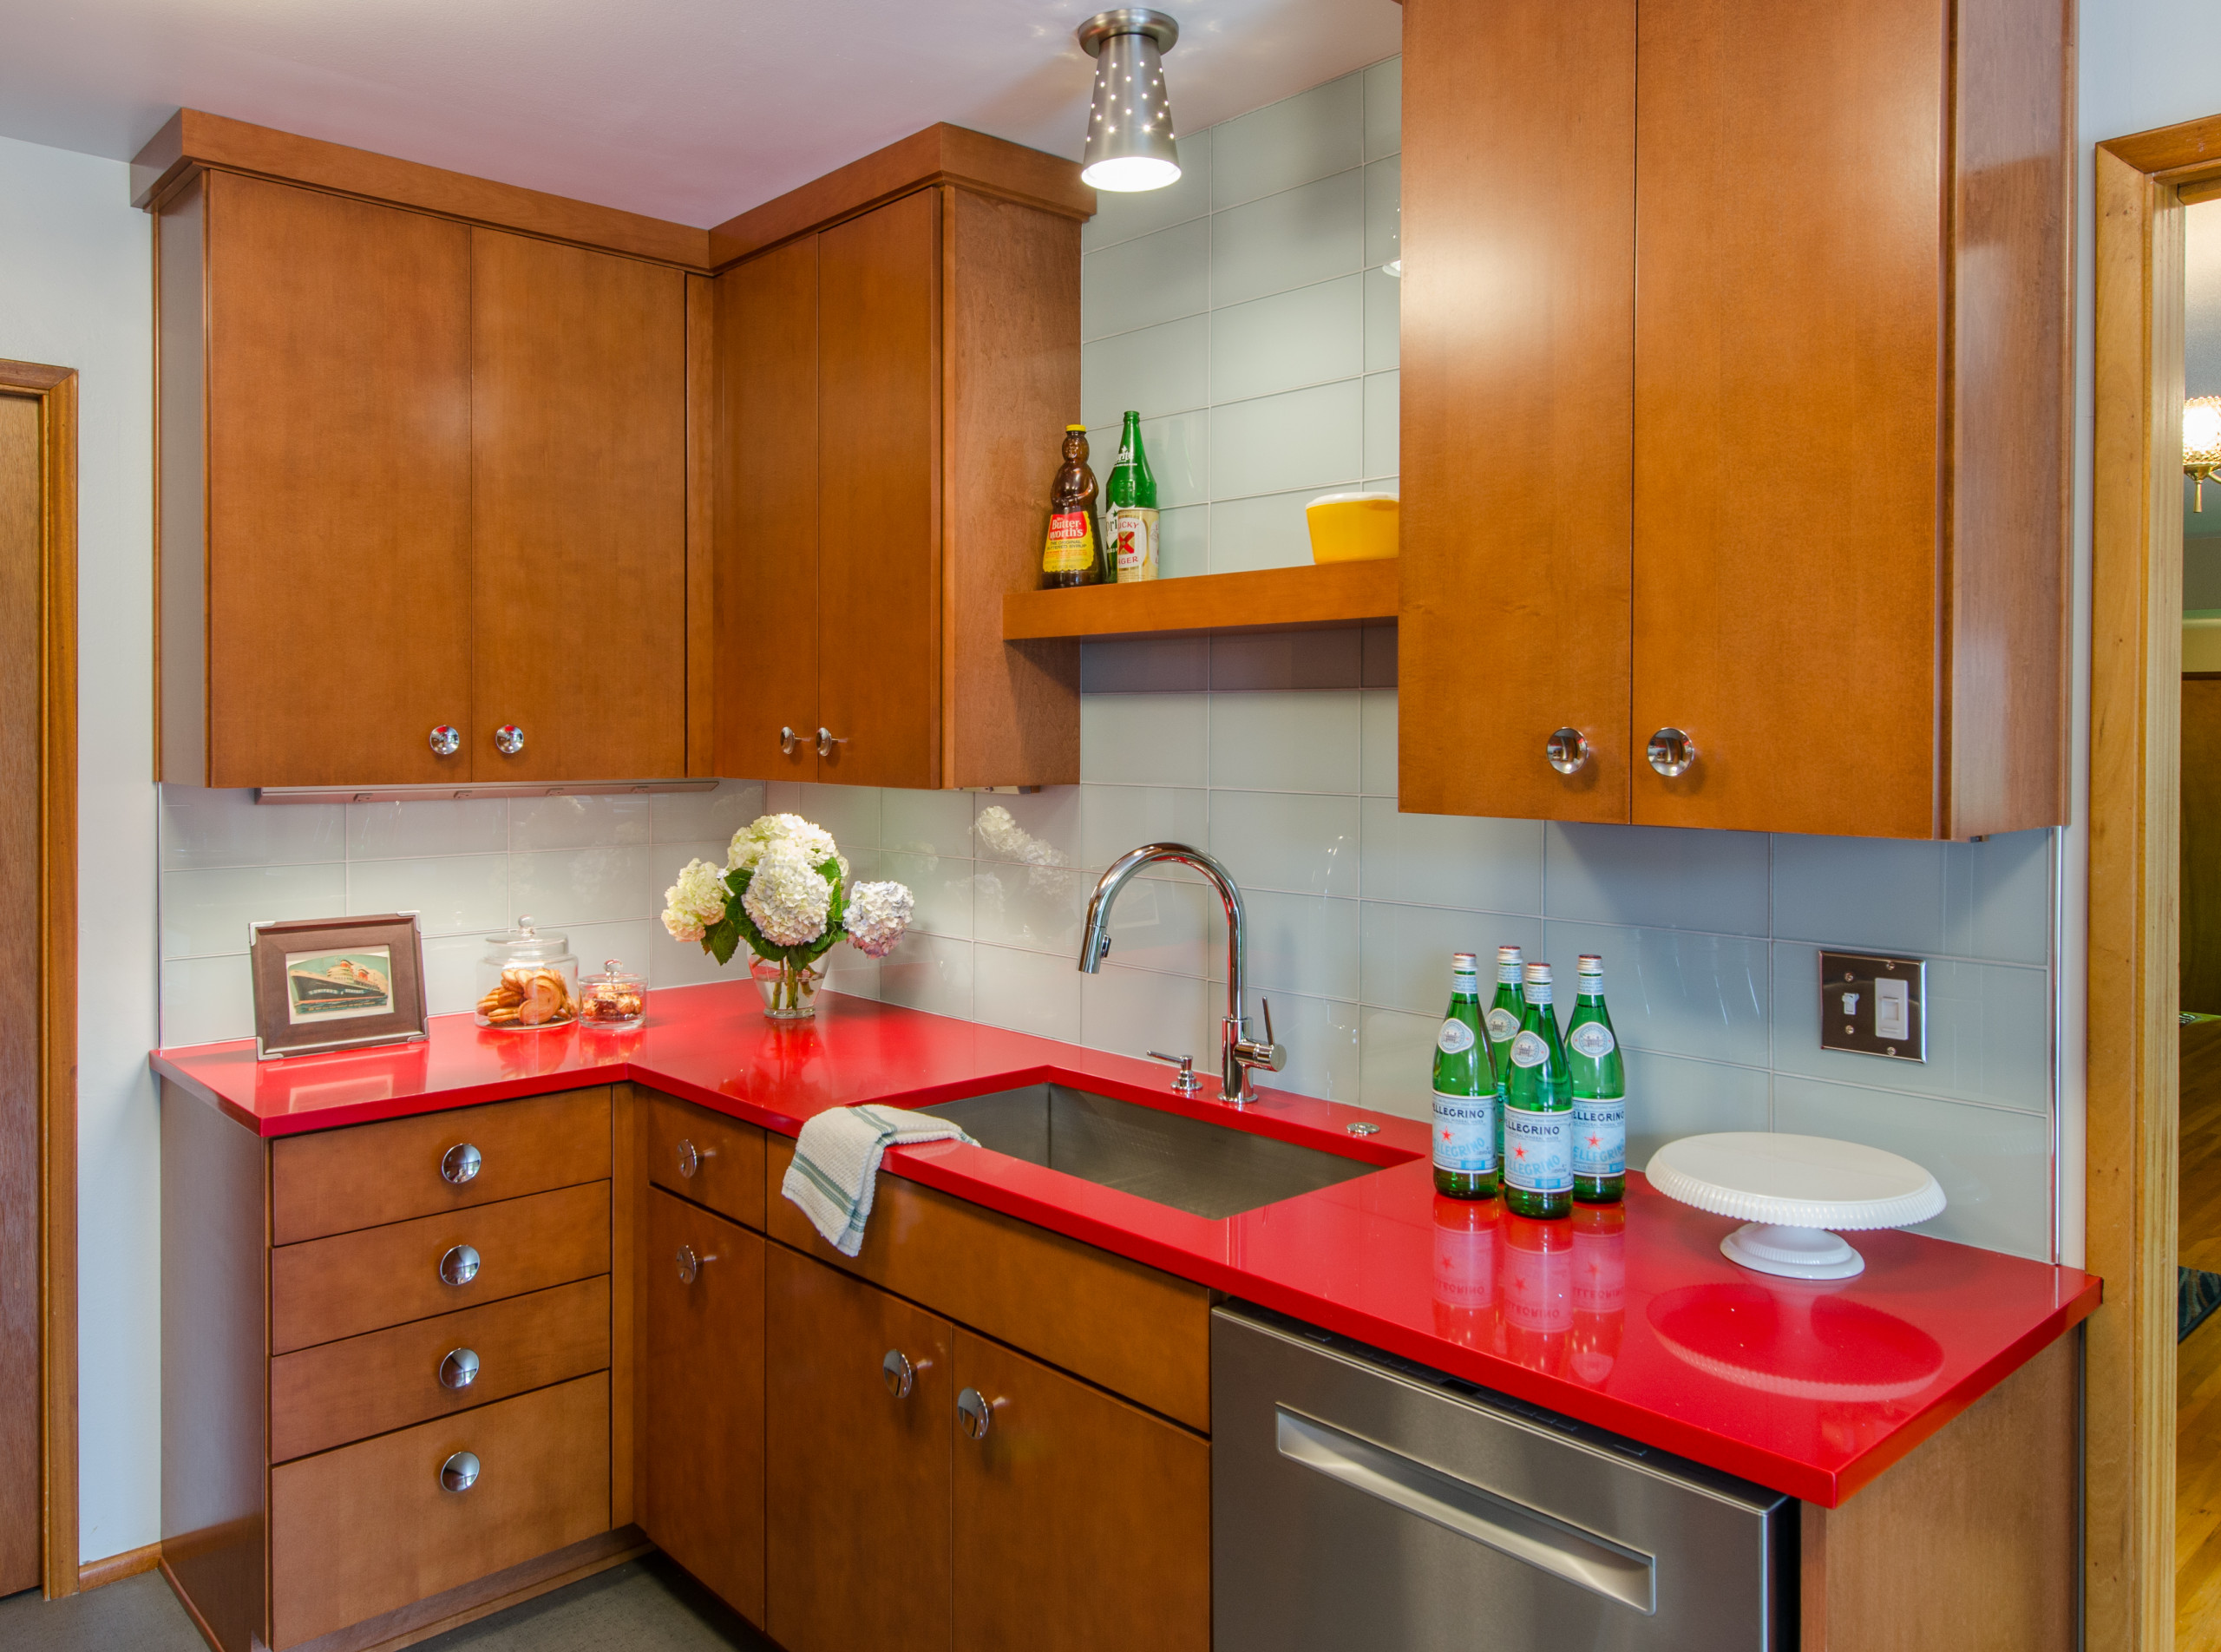 kitchen countertops red wall